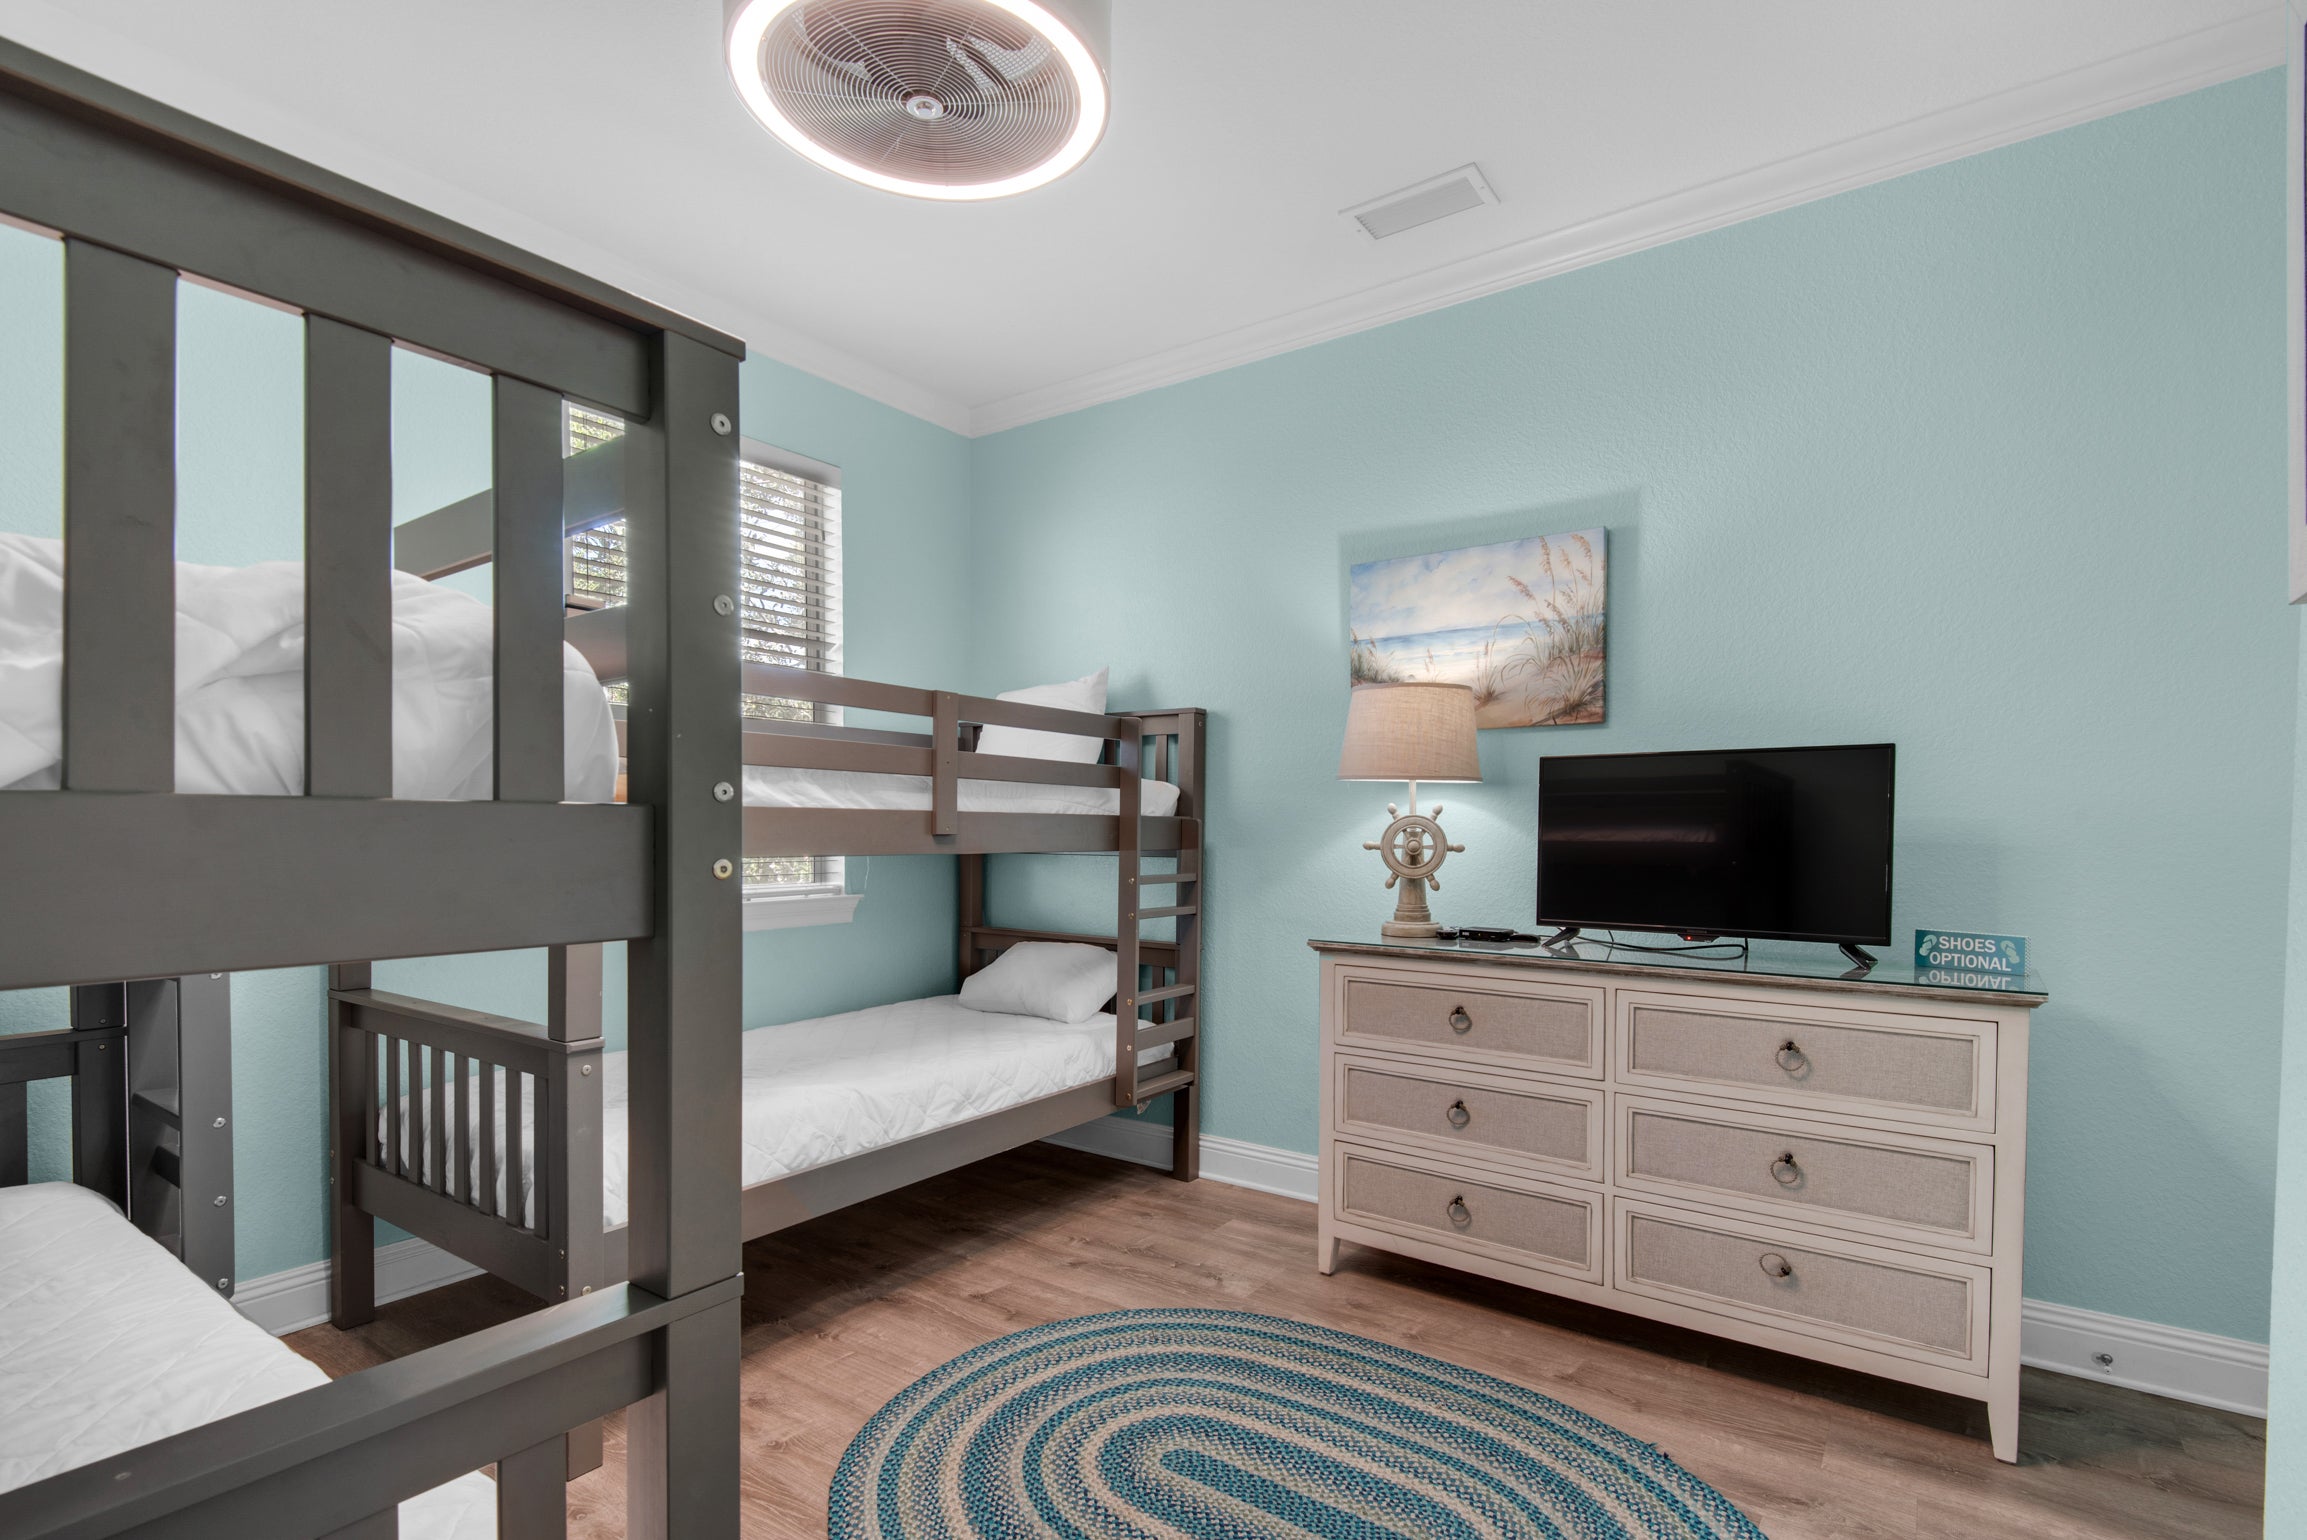 Guest room with bunk beds